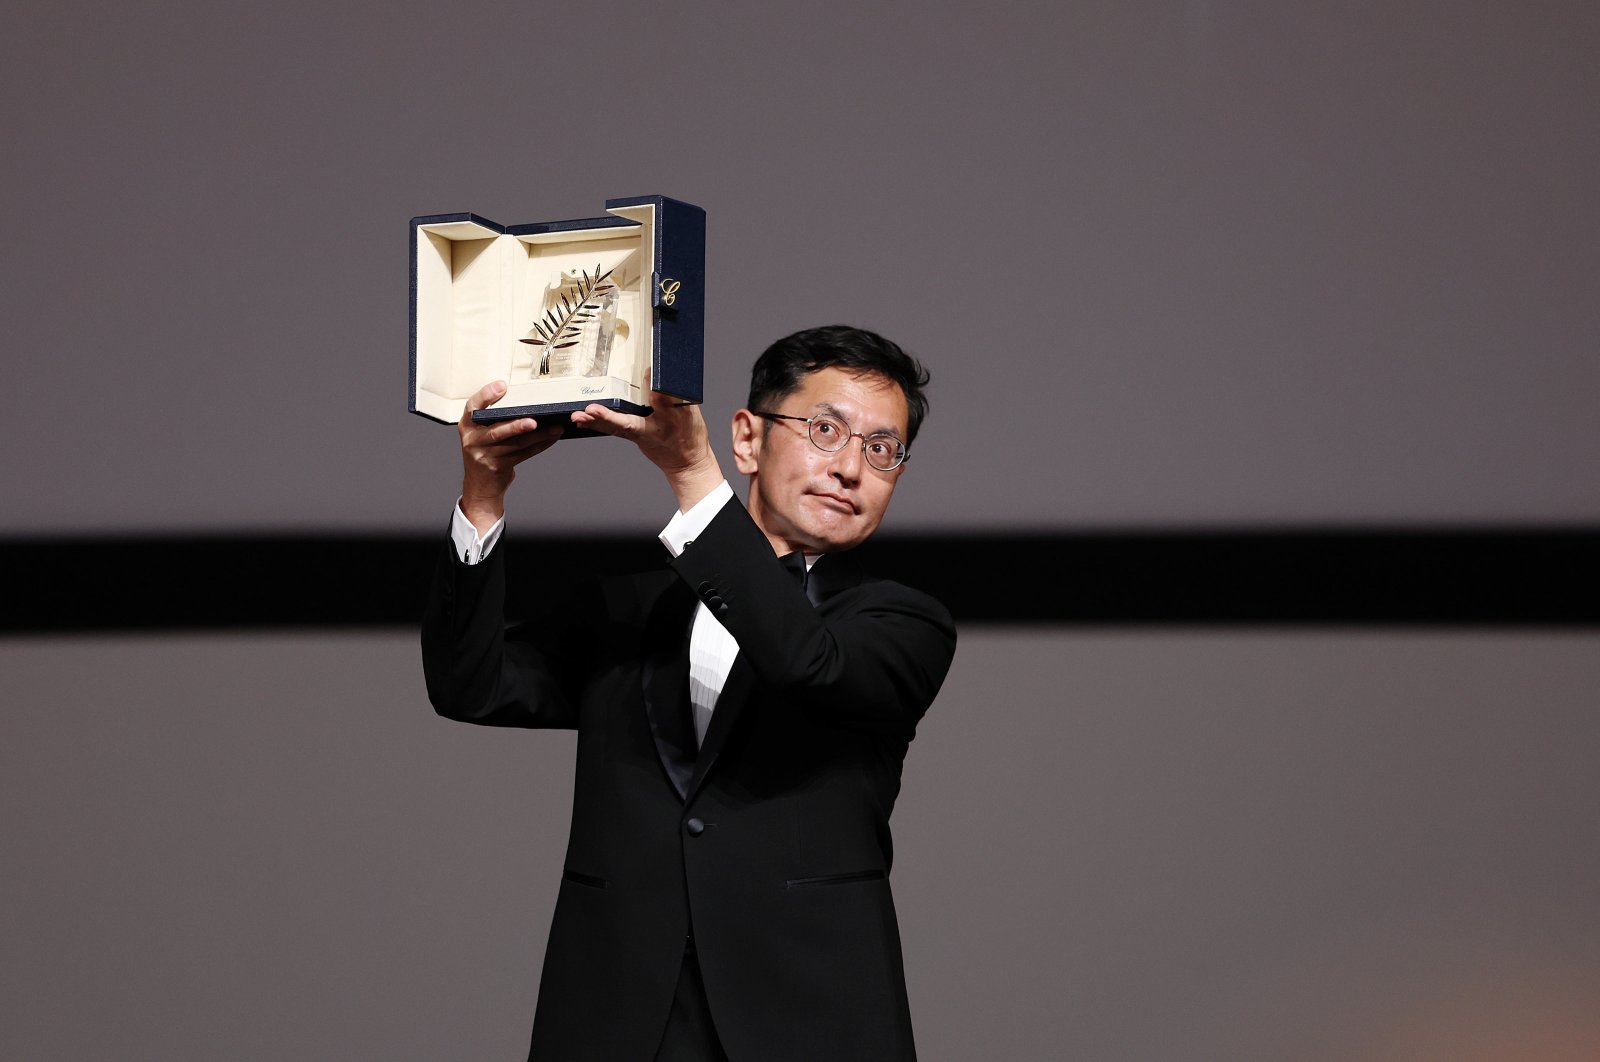 Studio Ghibli honored with historic Palme d’Or at Cannes Film Festival